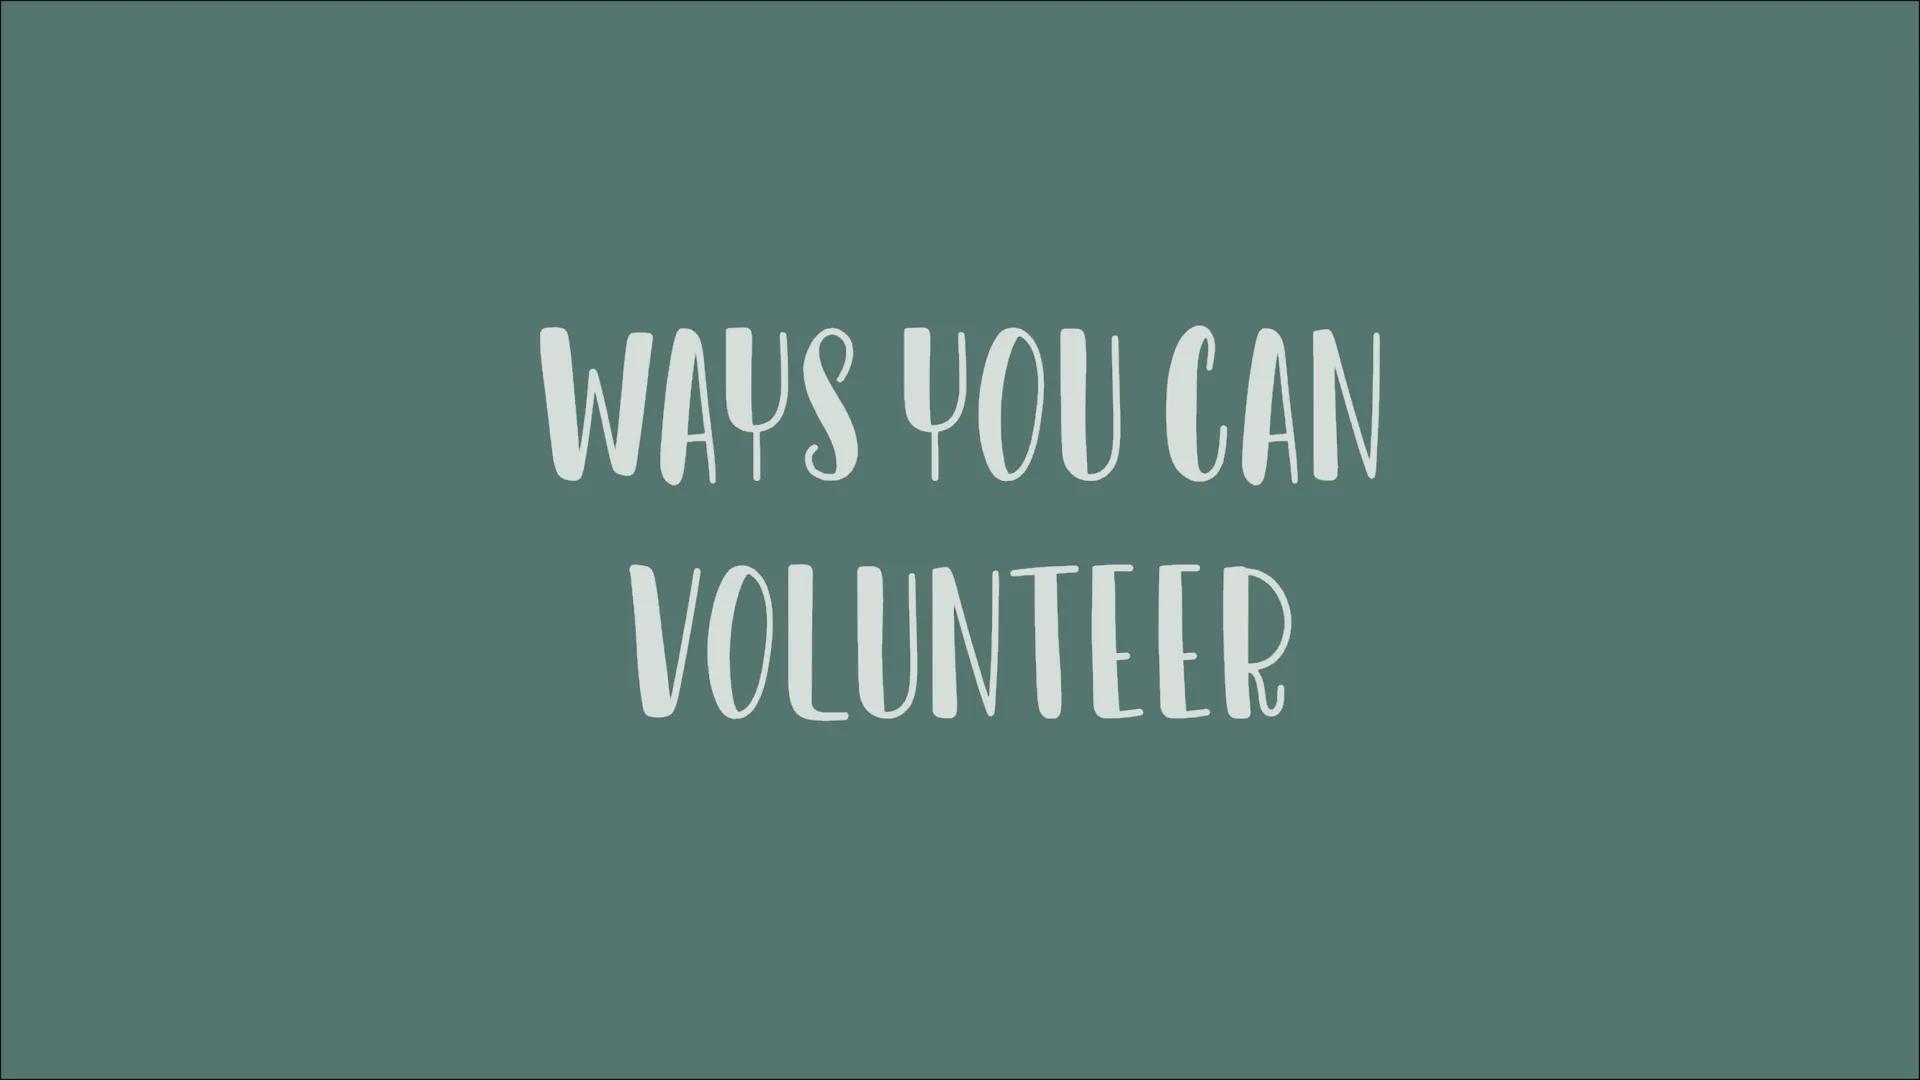 VOLUNTEERING
& Jab Year abroad
a WHAT IS VOLUNTEERING?
Doing unpayed work usally in developing countries in
order to have a positive impact 